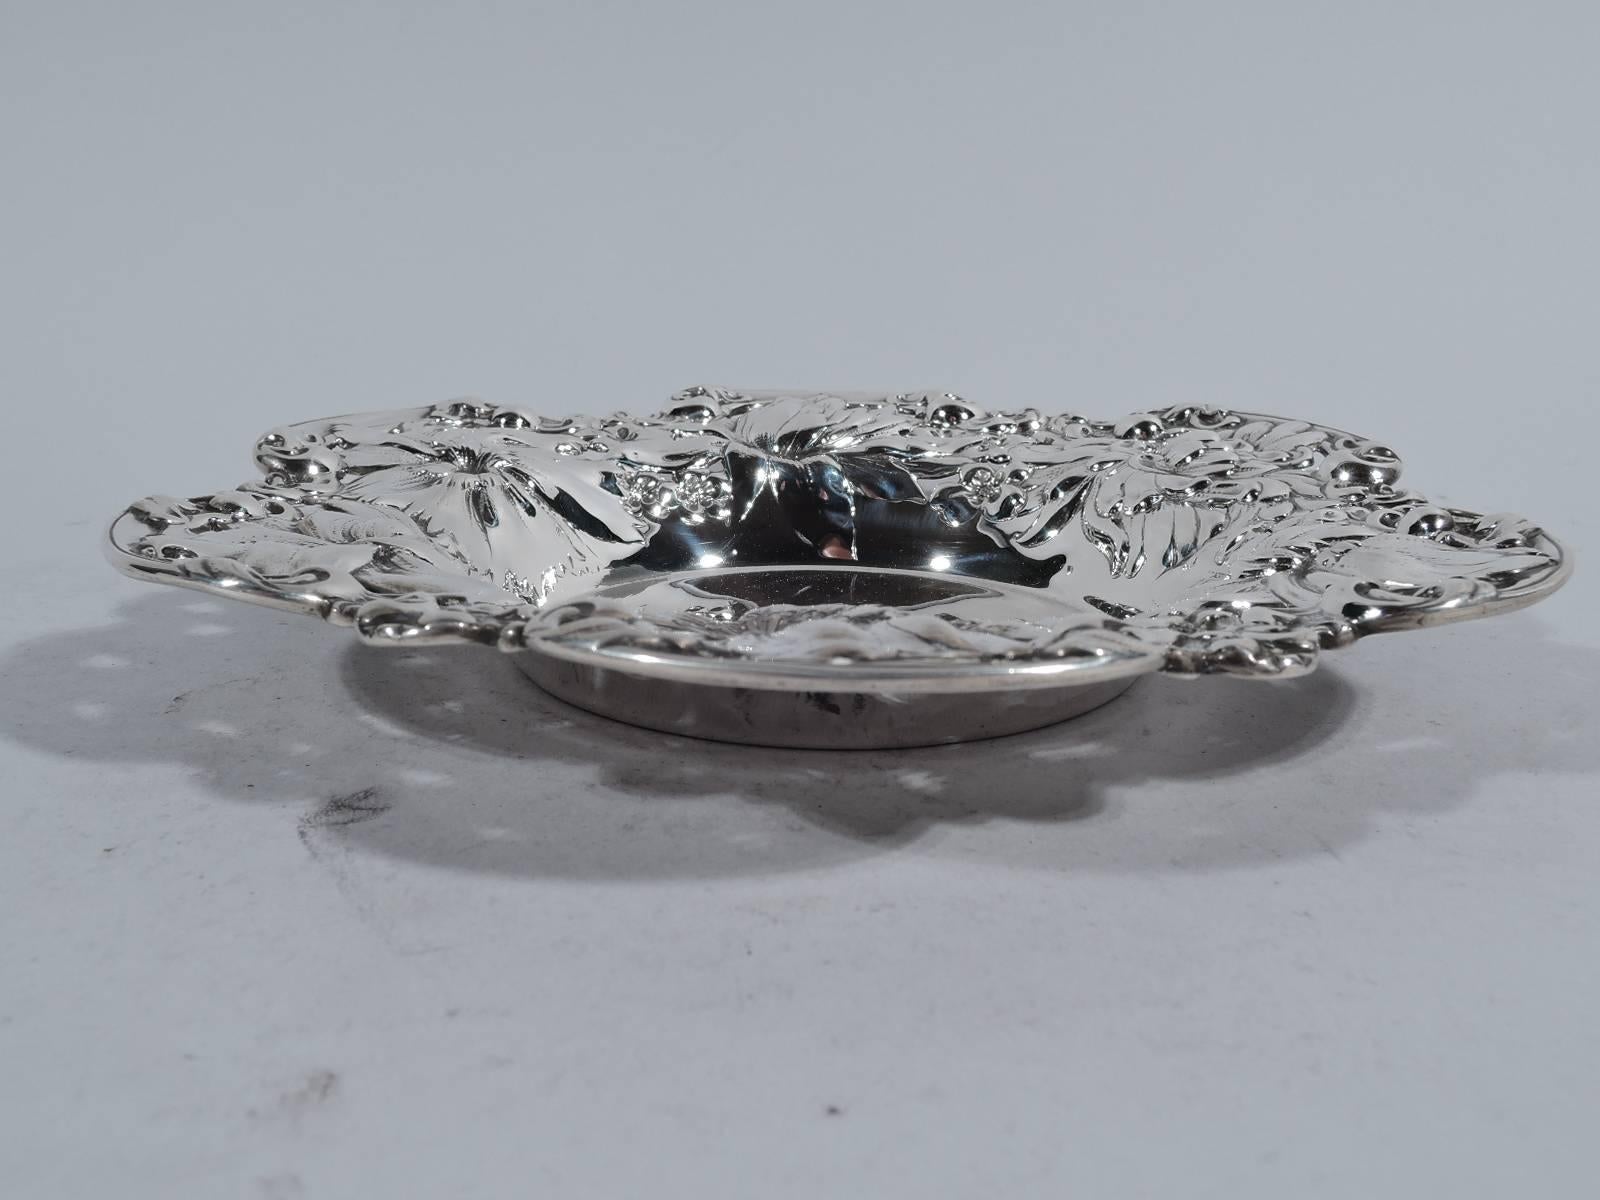 Victorian sterling silver bowl. Made by Gorham in Providence in 1899. Plain circular well and wide and asymmetrical rim with big blooms – dense and overlapping flowers framed by C-scroll rim. Exuberant and tactile. Interlaced script monogram.